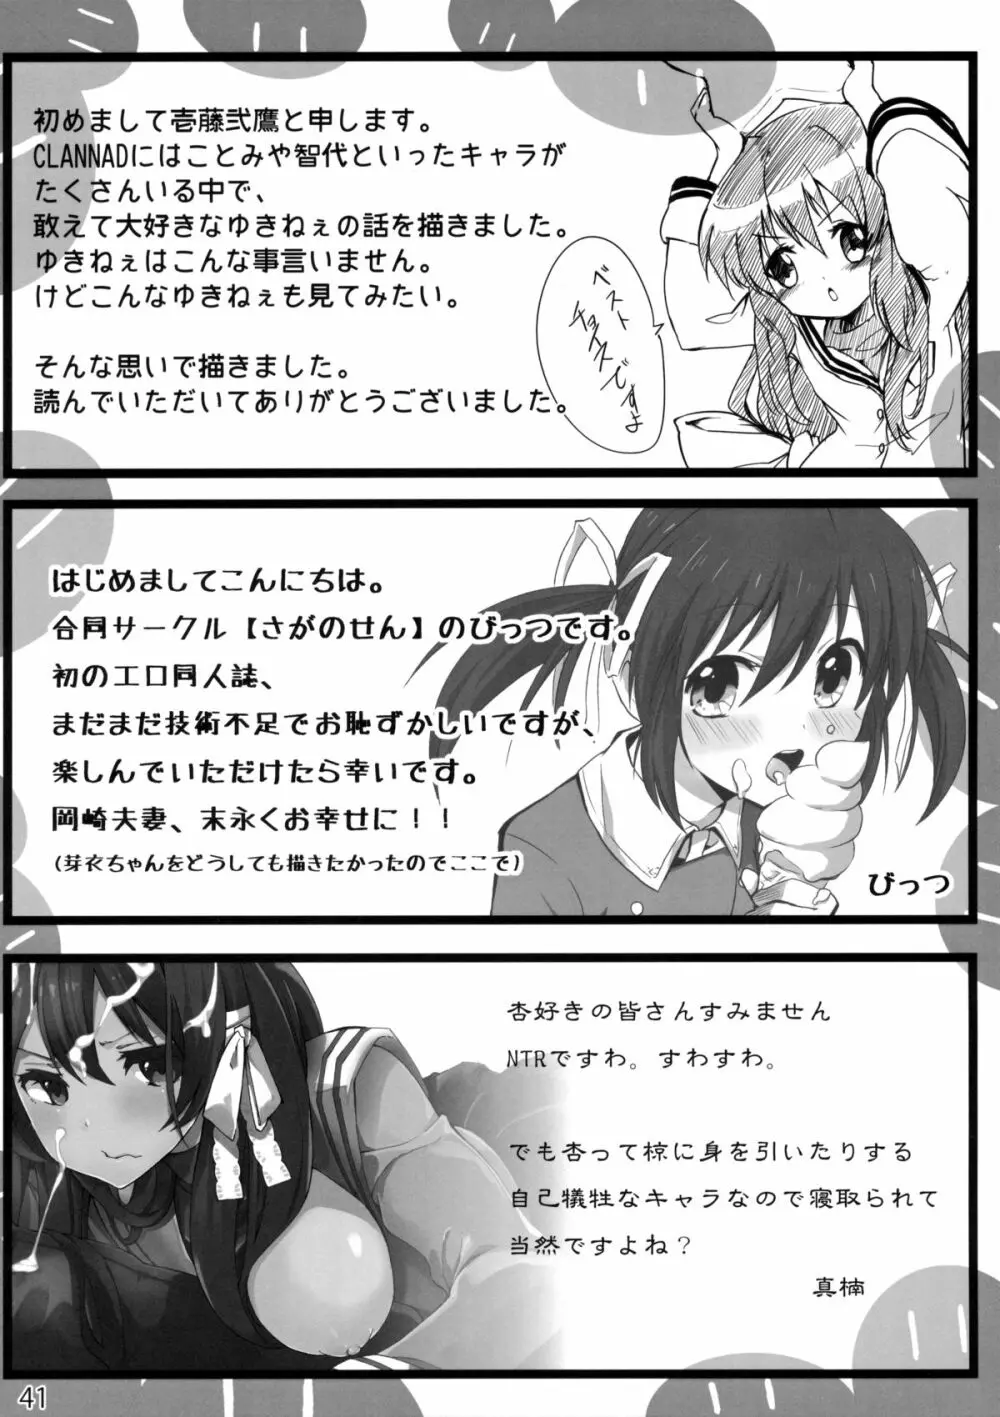 CLANNAD STATION - page40